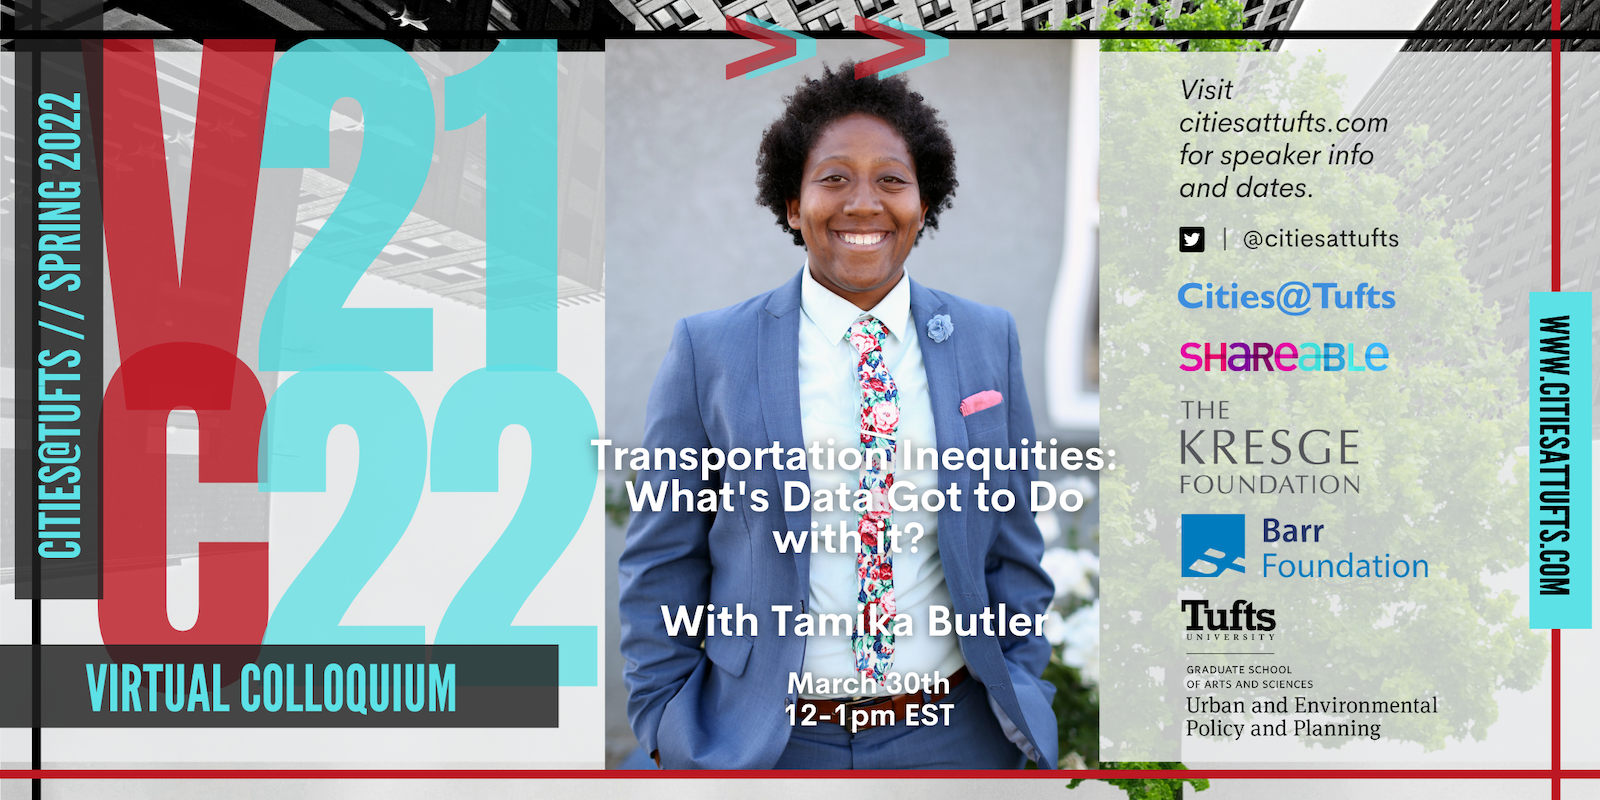 Cities@Tufts Transportation Inequities: What's Data Got to Do with It? with Tamika Butler